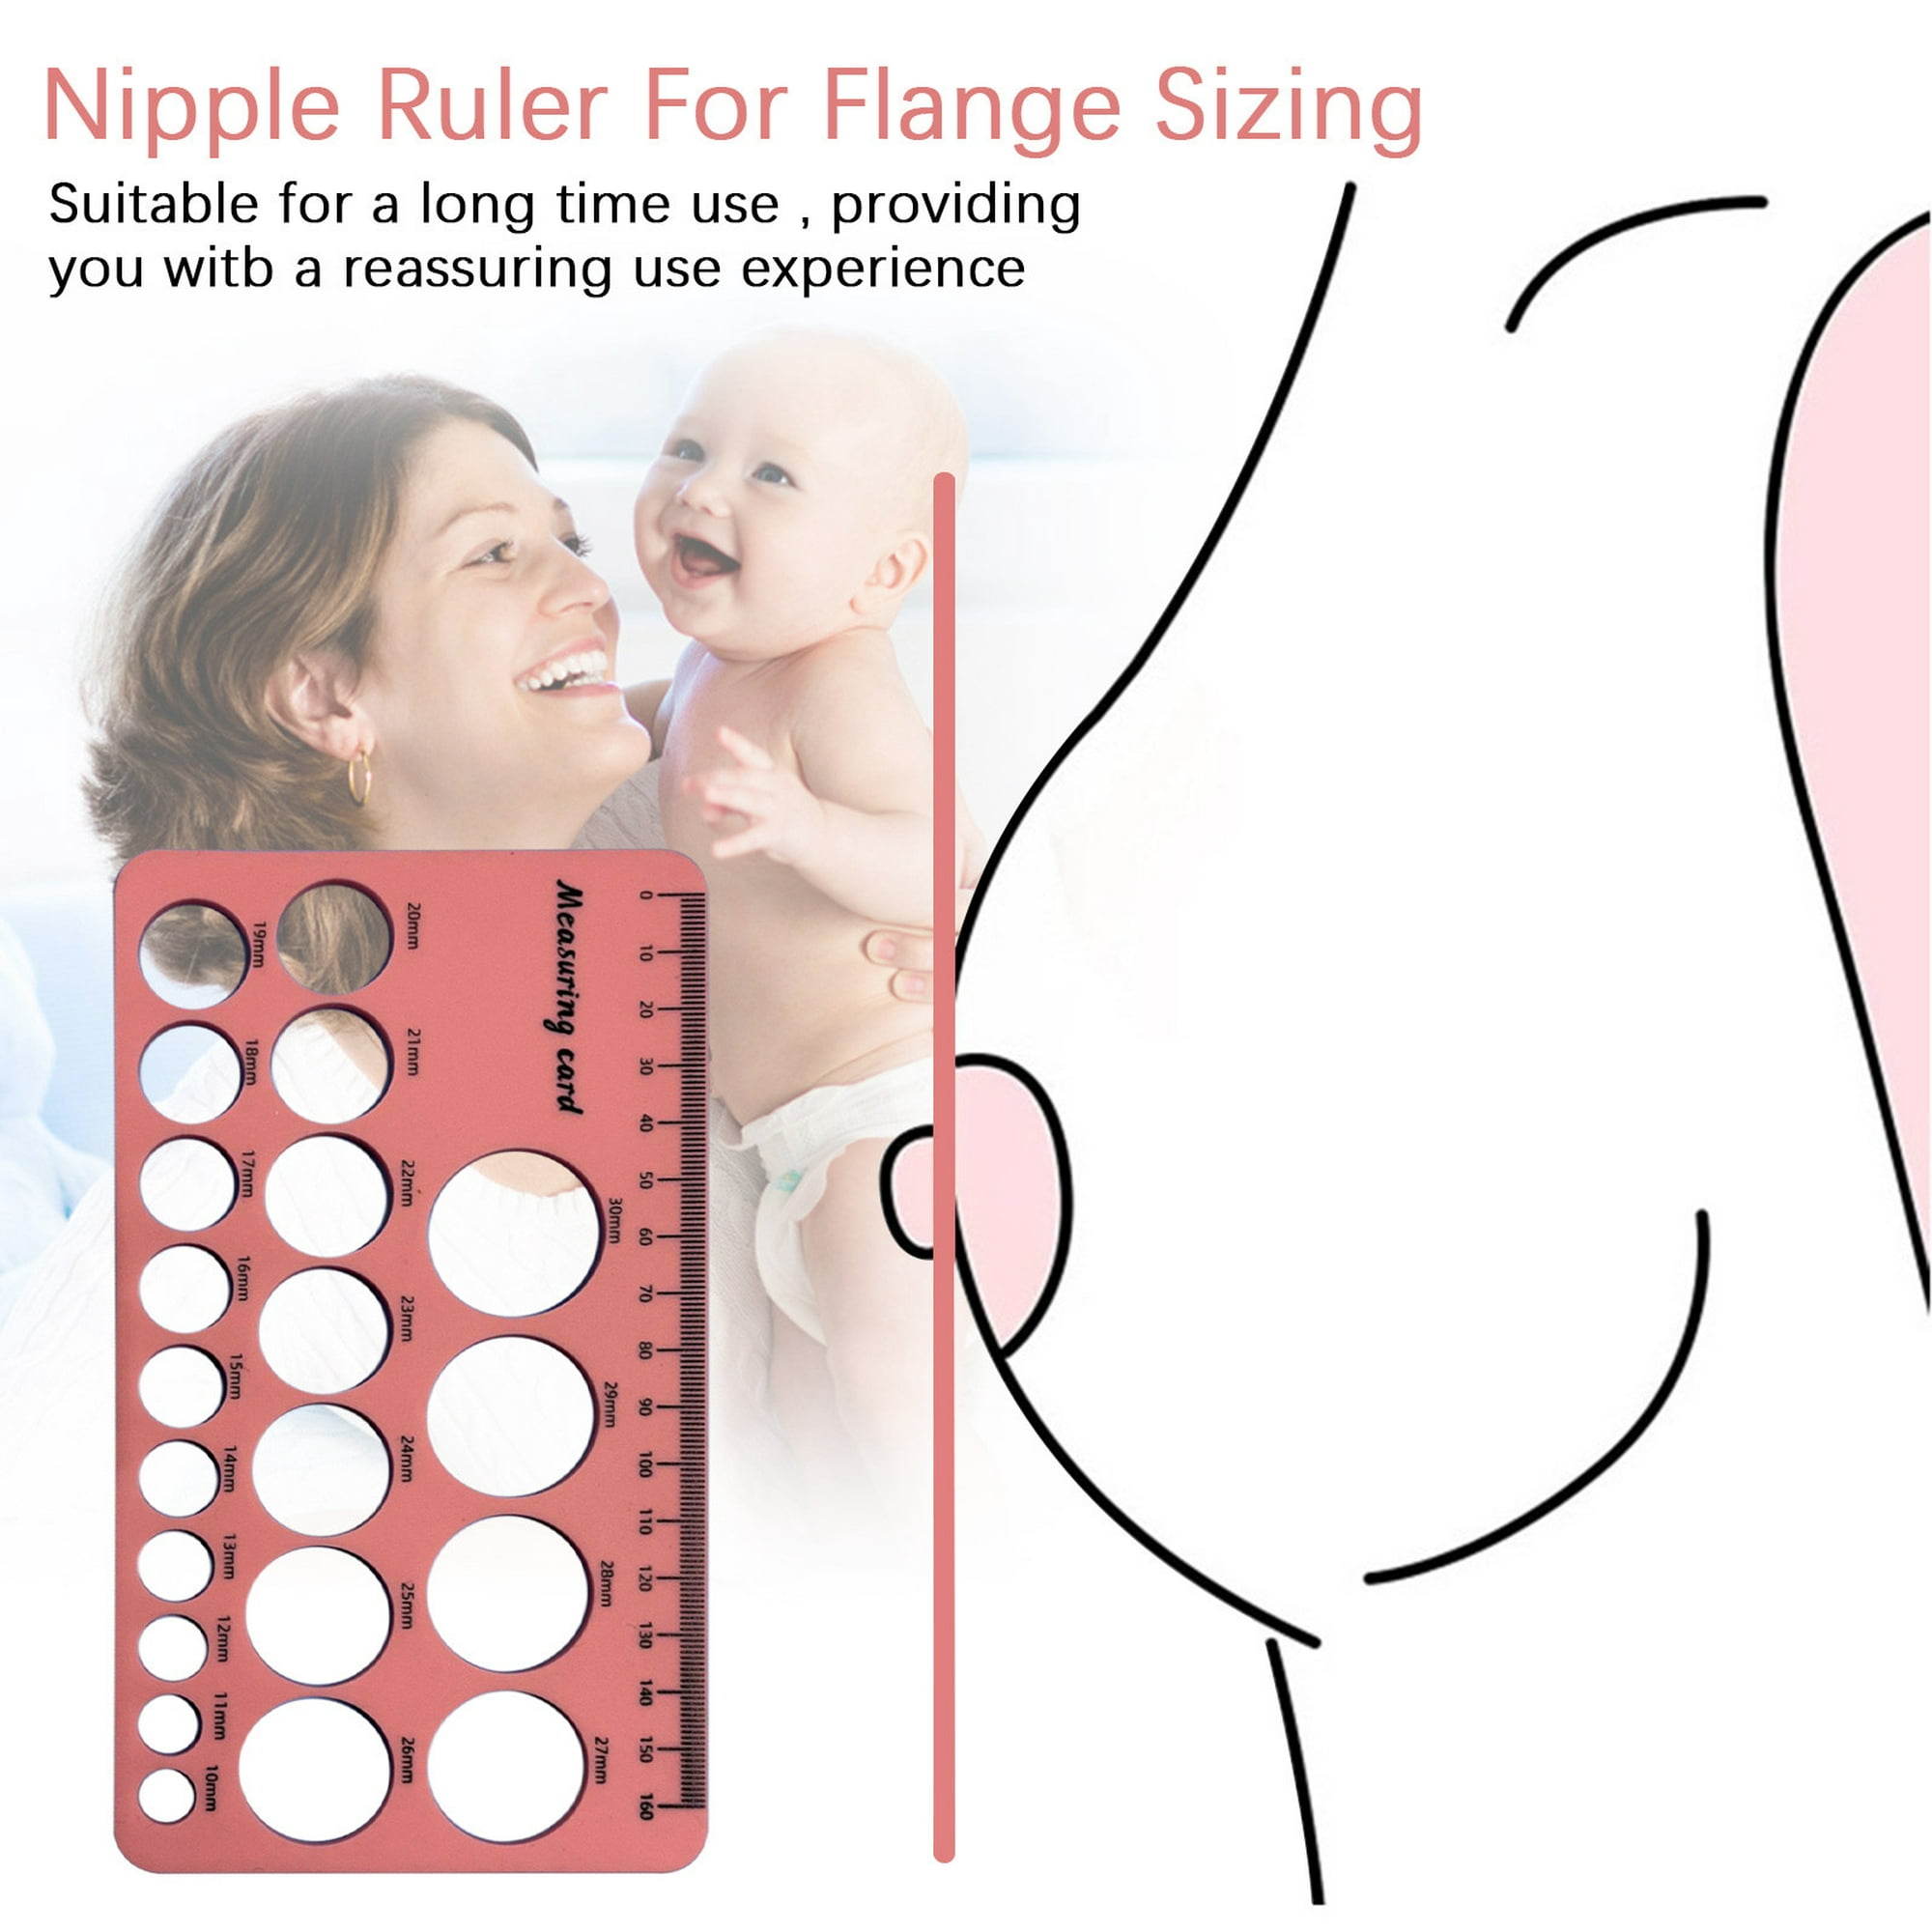 Nipple Ruler, Nipple Rulers for Flange Sizing Measurement Tool, Silicone &  Soft Flange Size Measure for Nipples, Breast Flange Measuring Tool Breast